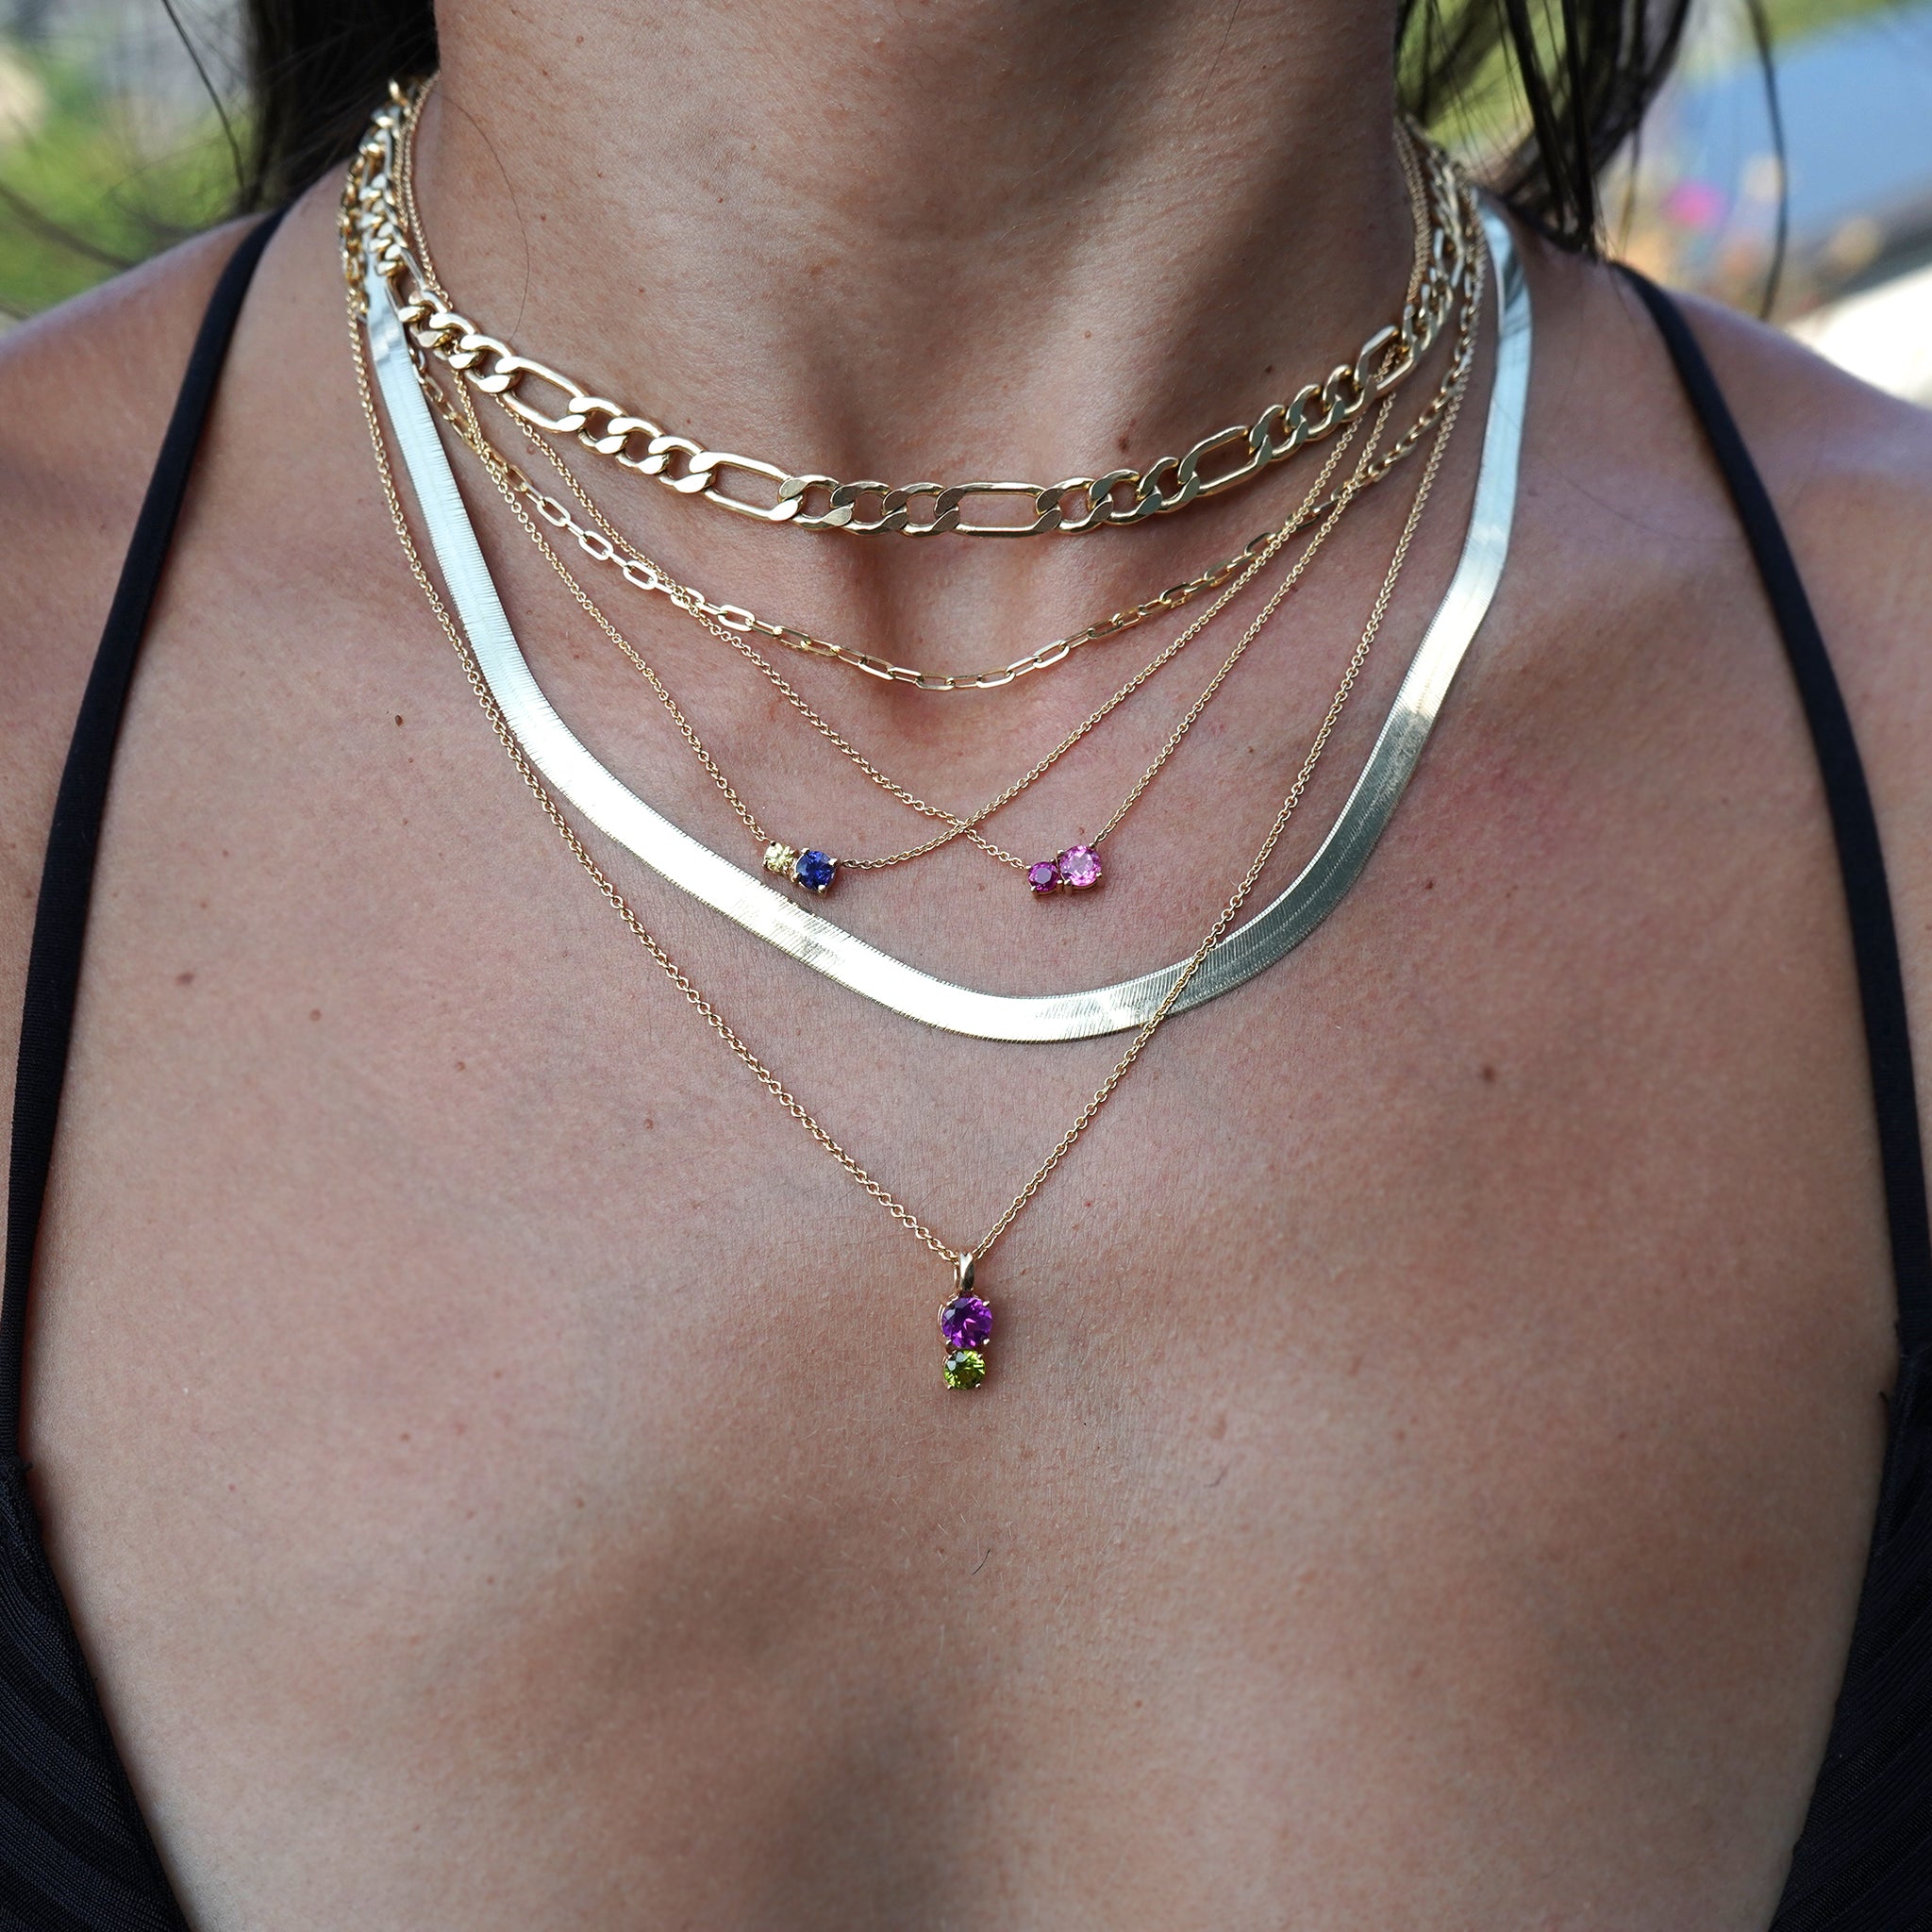 A woman's neck with the Royal Mimosa necklace layered with other Lico Jewelry necklaces and chains.